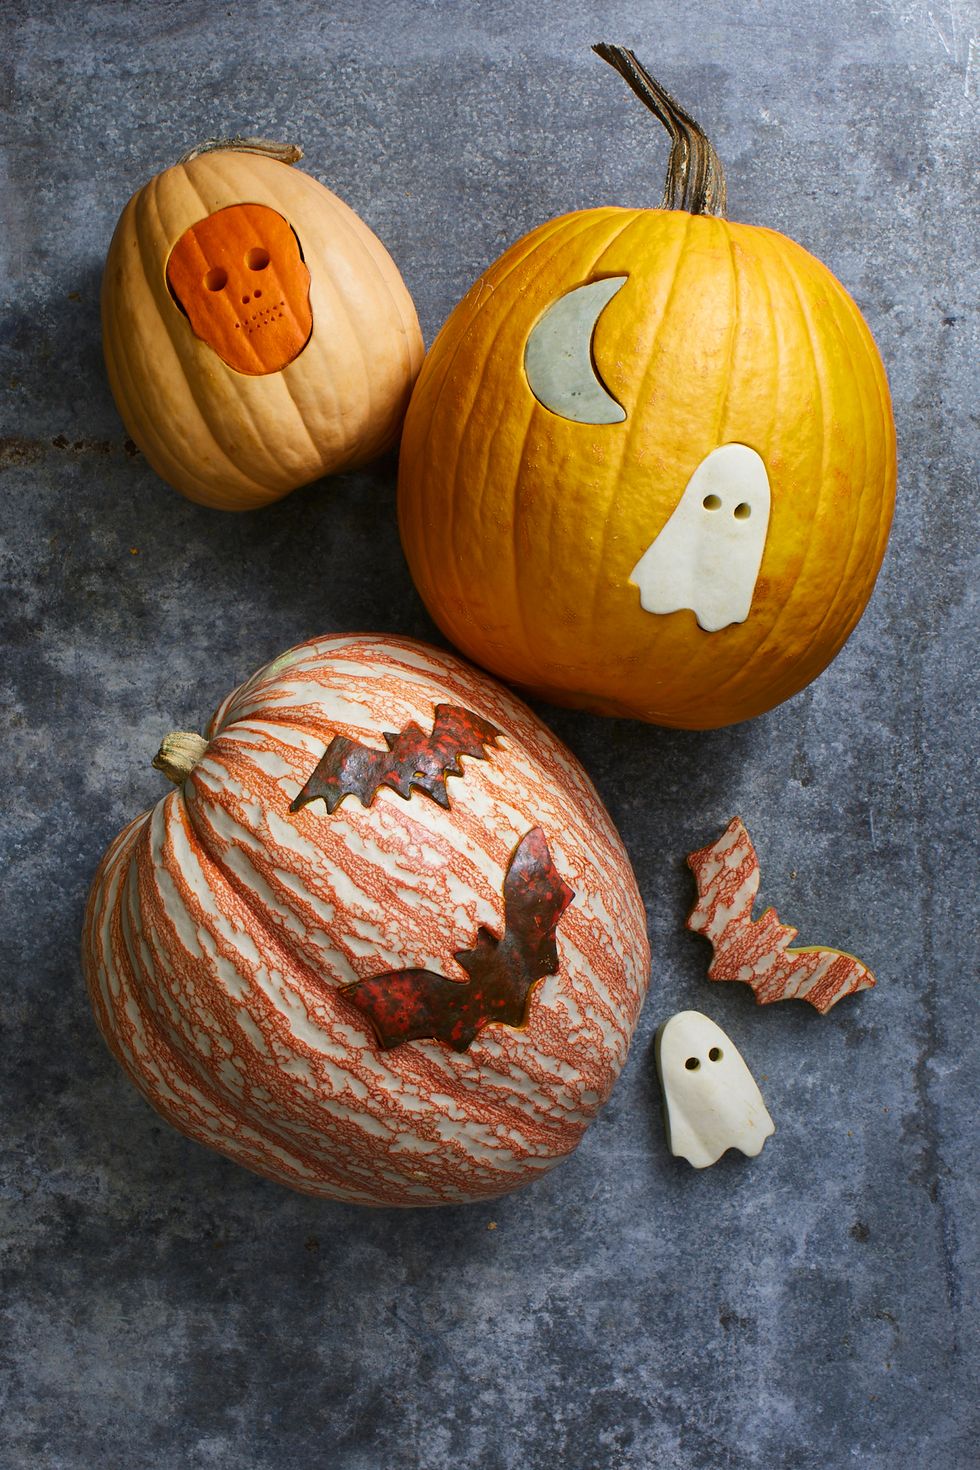 pumpkin carving ideas, three pumpkins with different shapes punched into them, like ghosts, bats and skeletons